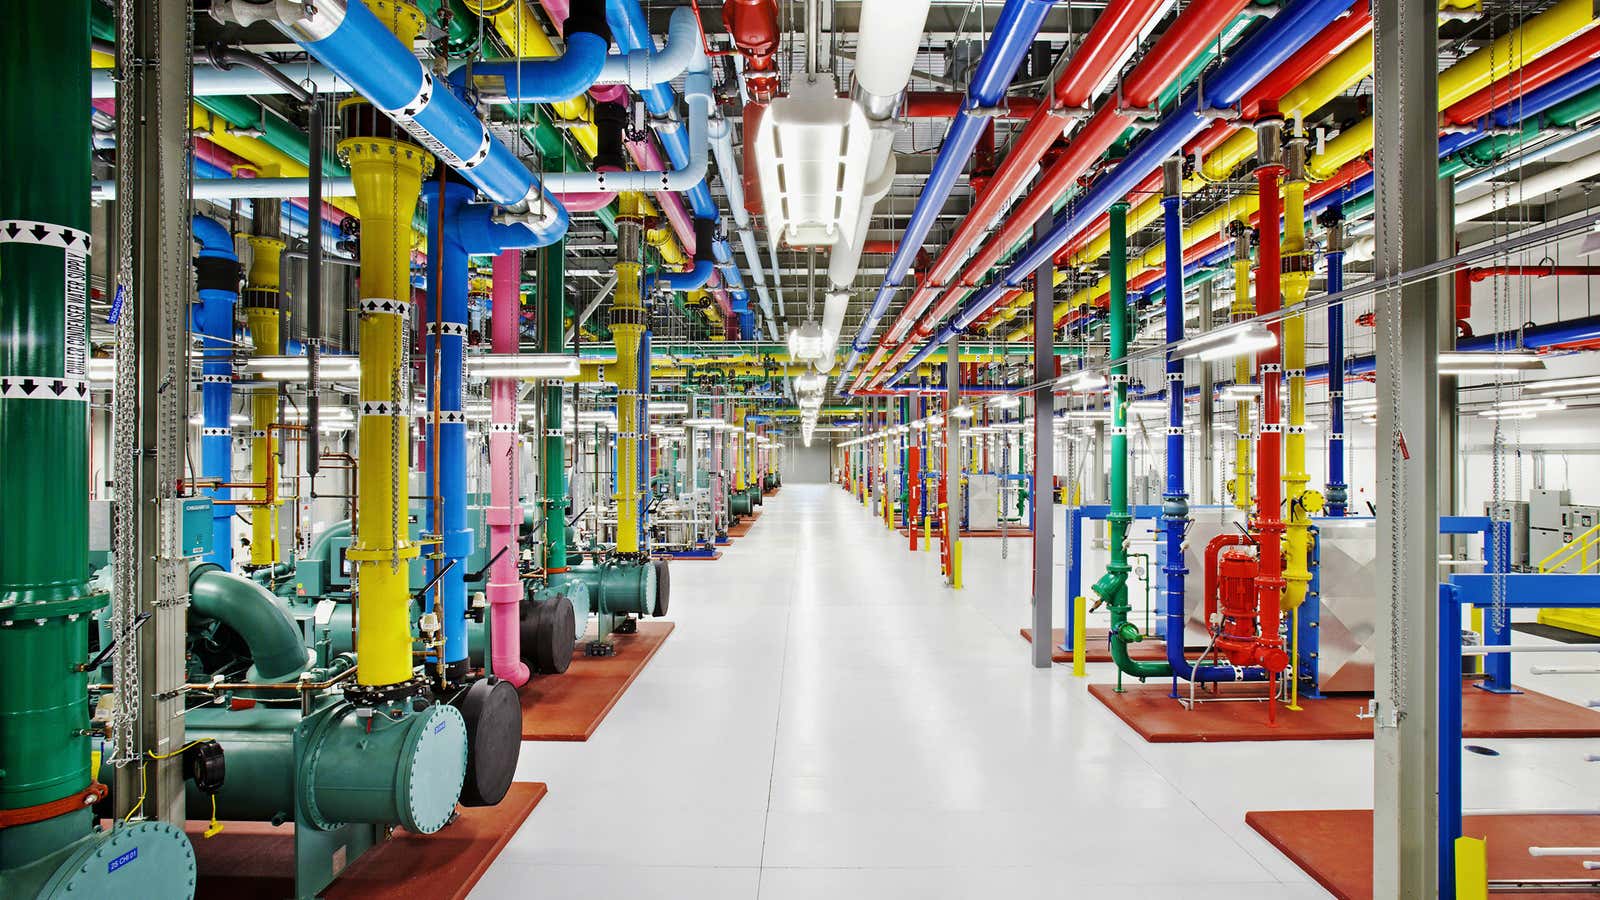 In Google’s data centers, the internet really is a series of tubes.